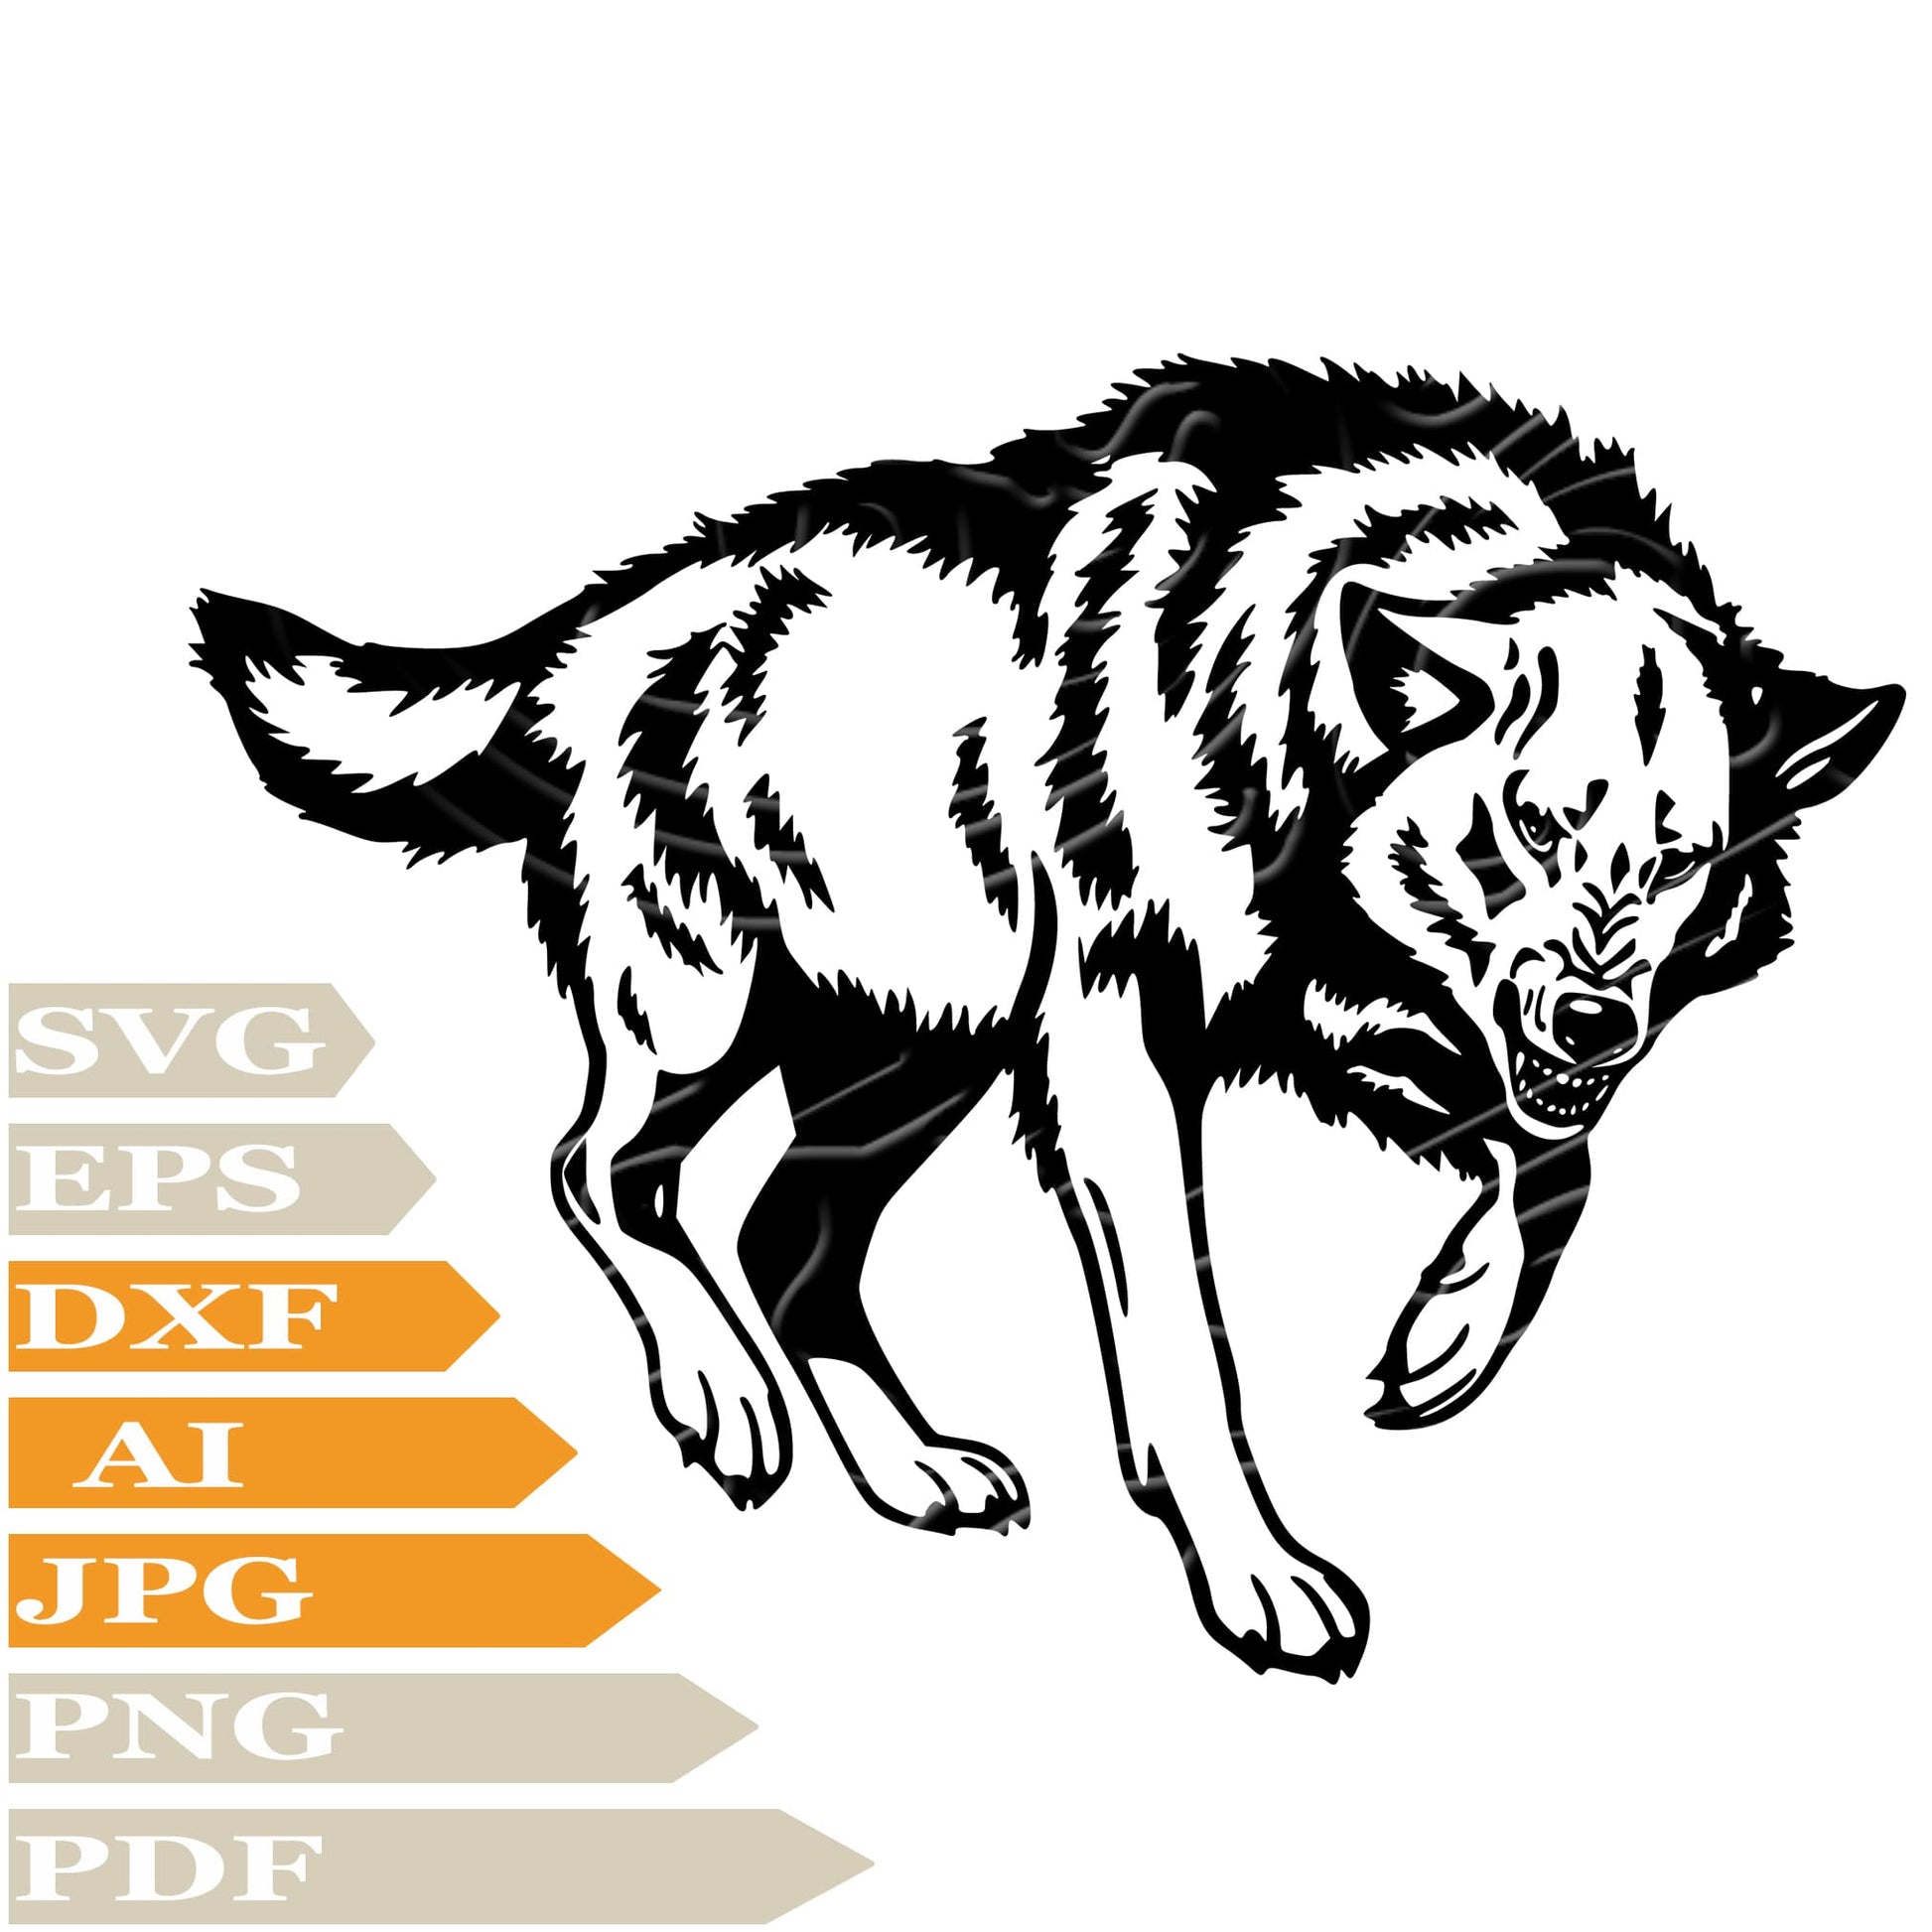 Wolf SVG-Angry Wolf Personalized SVG-Wild Wolf Drawing SVG-Wolf Wild Animals Vector Illustration-PNG-Decal-Cricut-Digital Files-Clip Art-Cut File-For Shirts-Silhouette